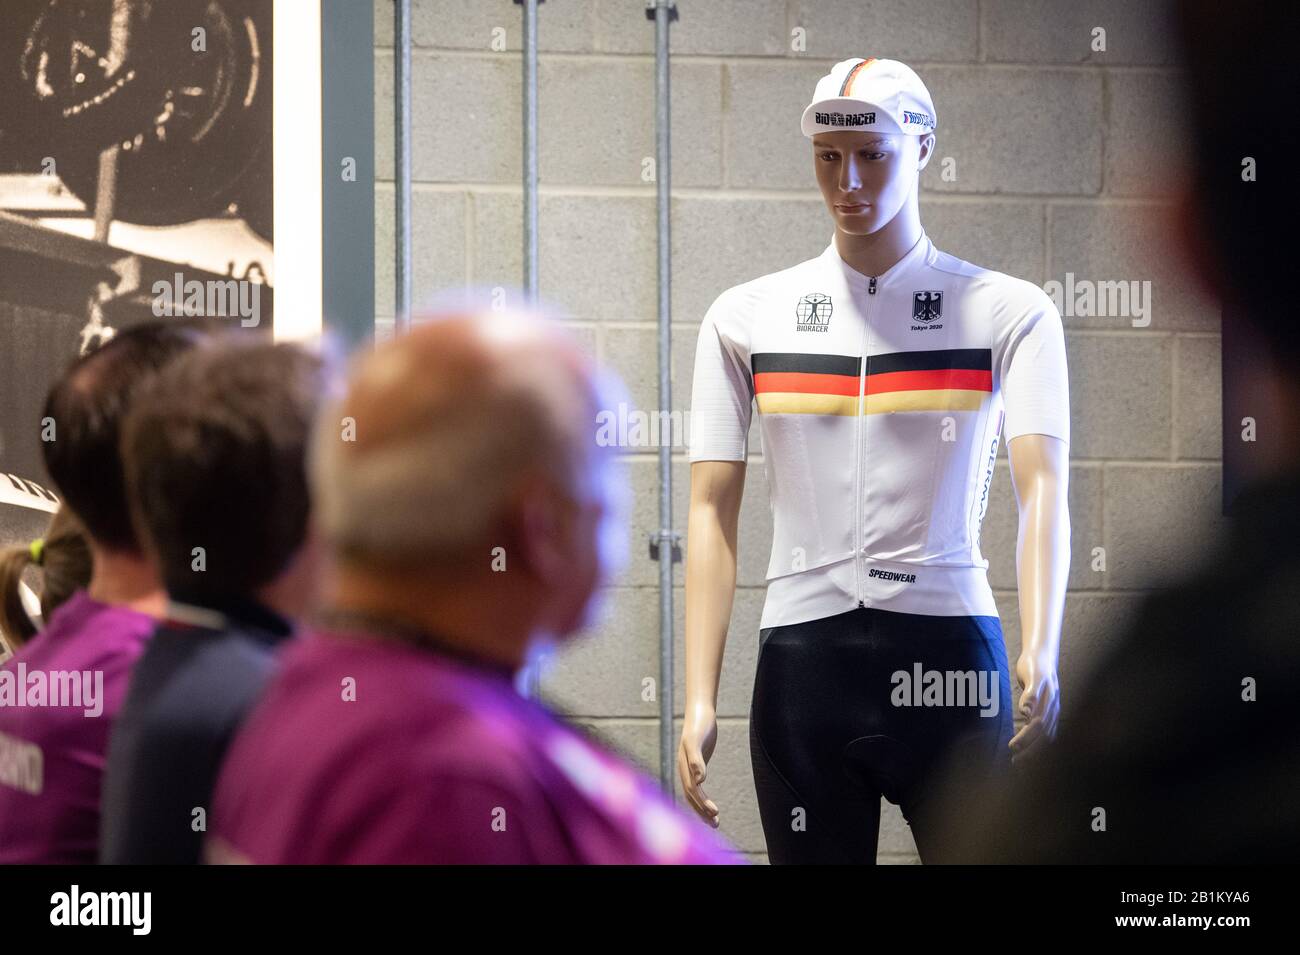 Berlin, Germany. 26th Feb, 2020. Cycling/Railway: World Championship: A mannequin wears the cyclists' jersey for the 2020 Olympic Games in Tokyo. Credit: Sebastian Gollnow/dpa/Alamy Live News Stock Photo